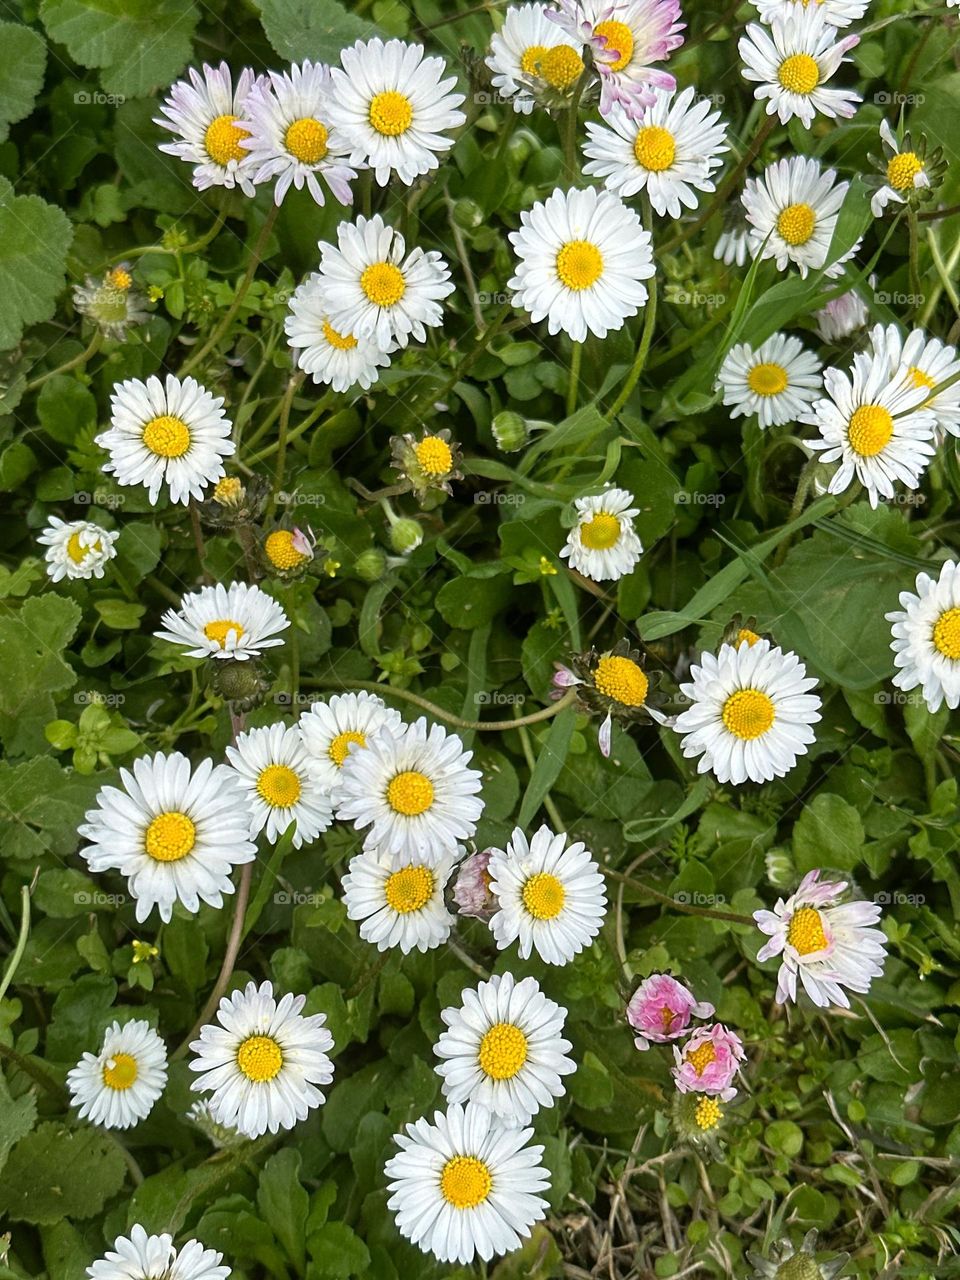 Daisies on a field 